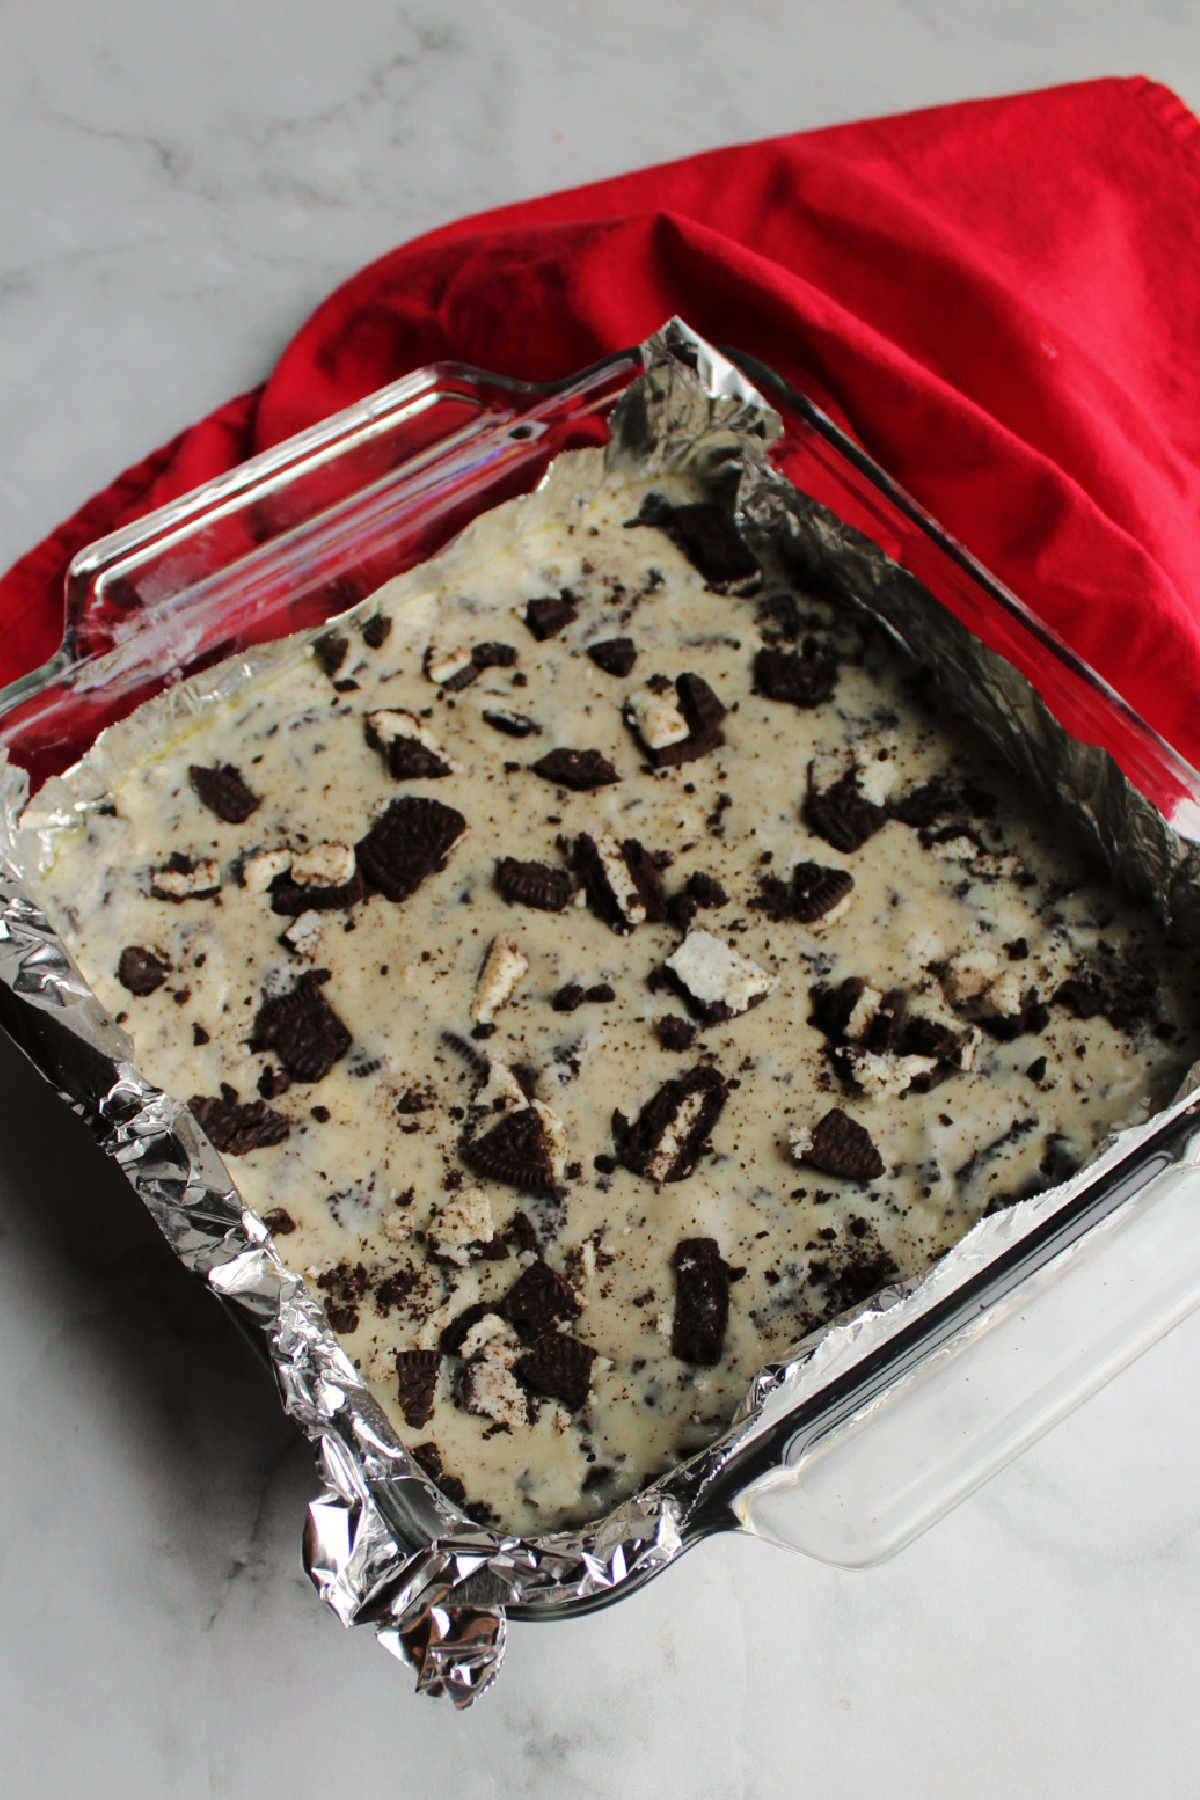 Pan of cookies and cream fudge ready to chill.